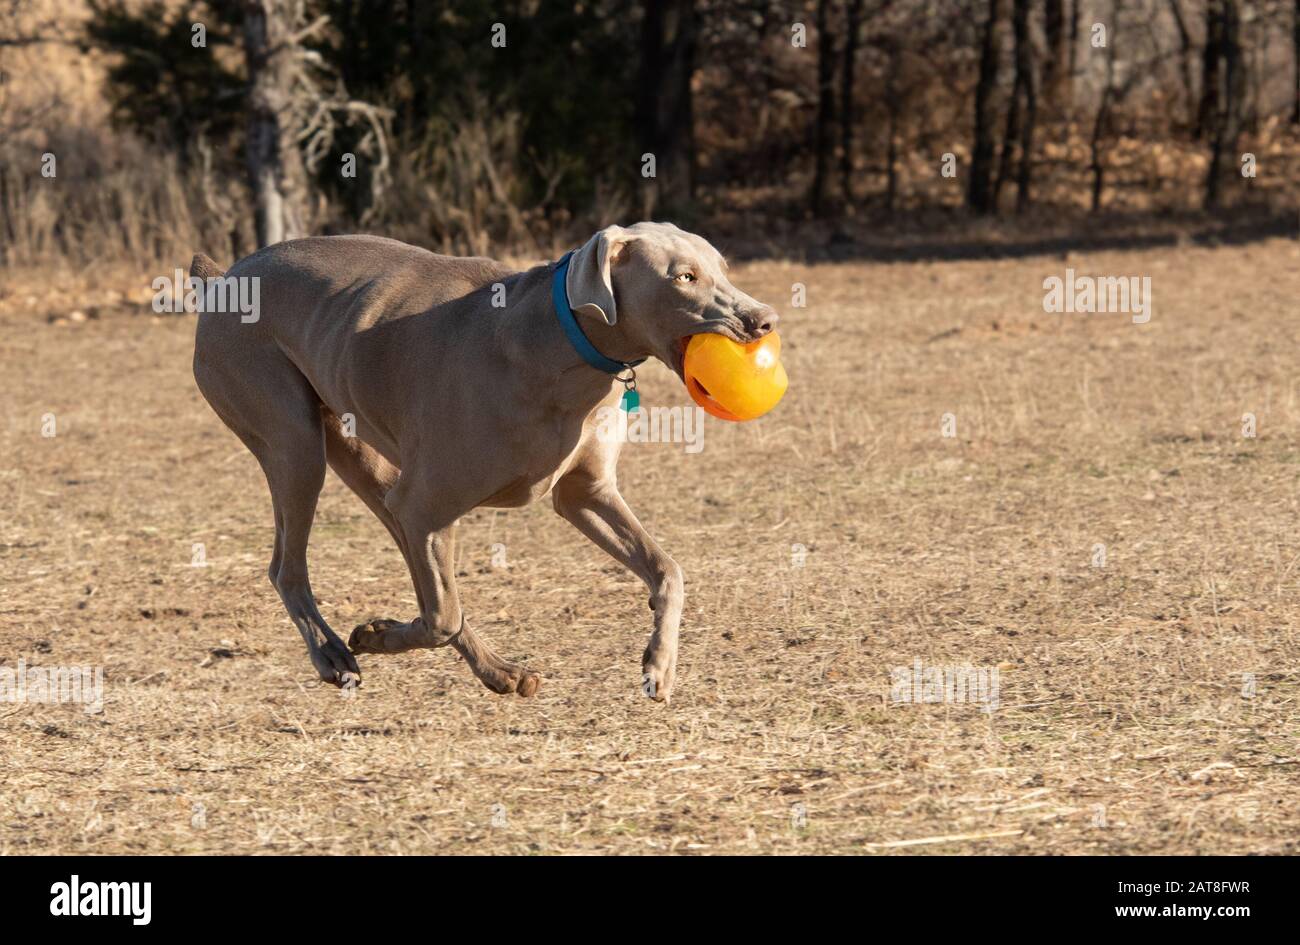 Weimaraner dog running, carrying an orange ball while playing outdoors Stock Photo